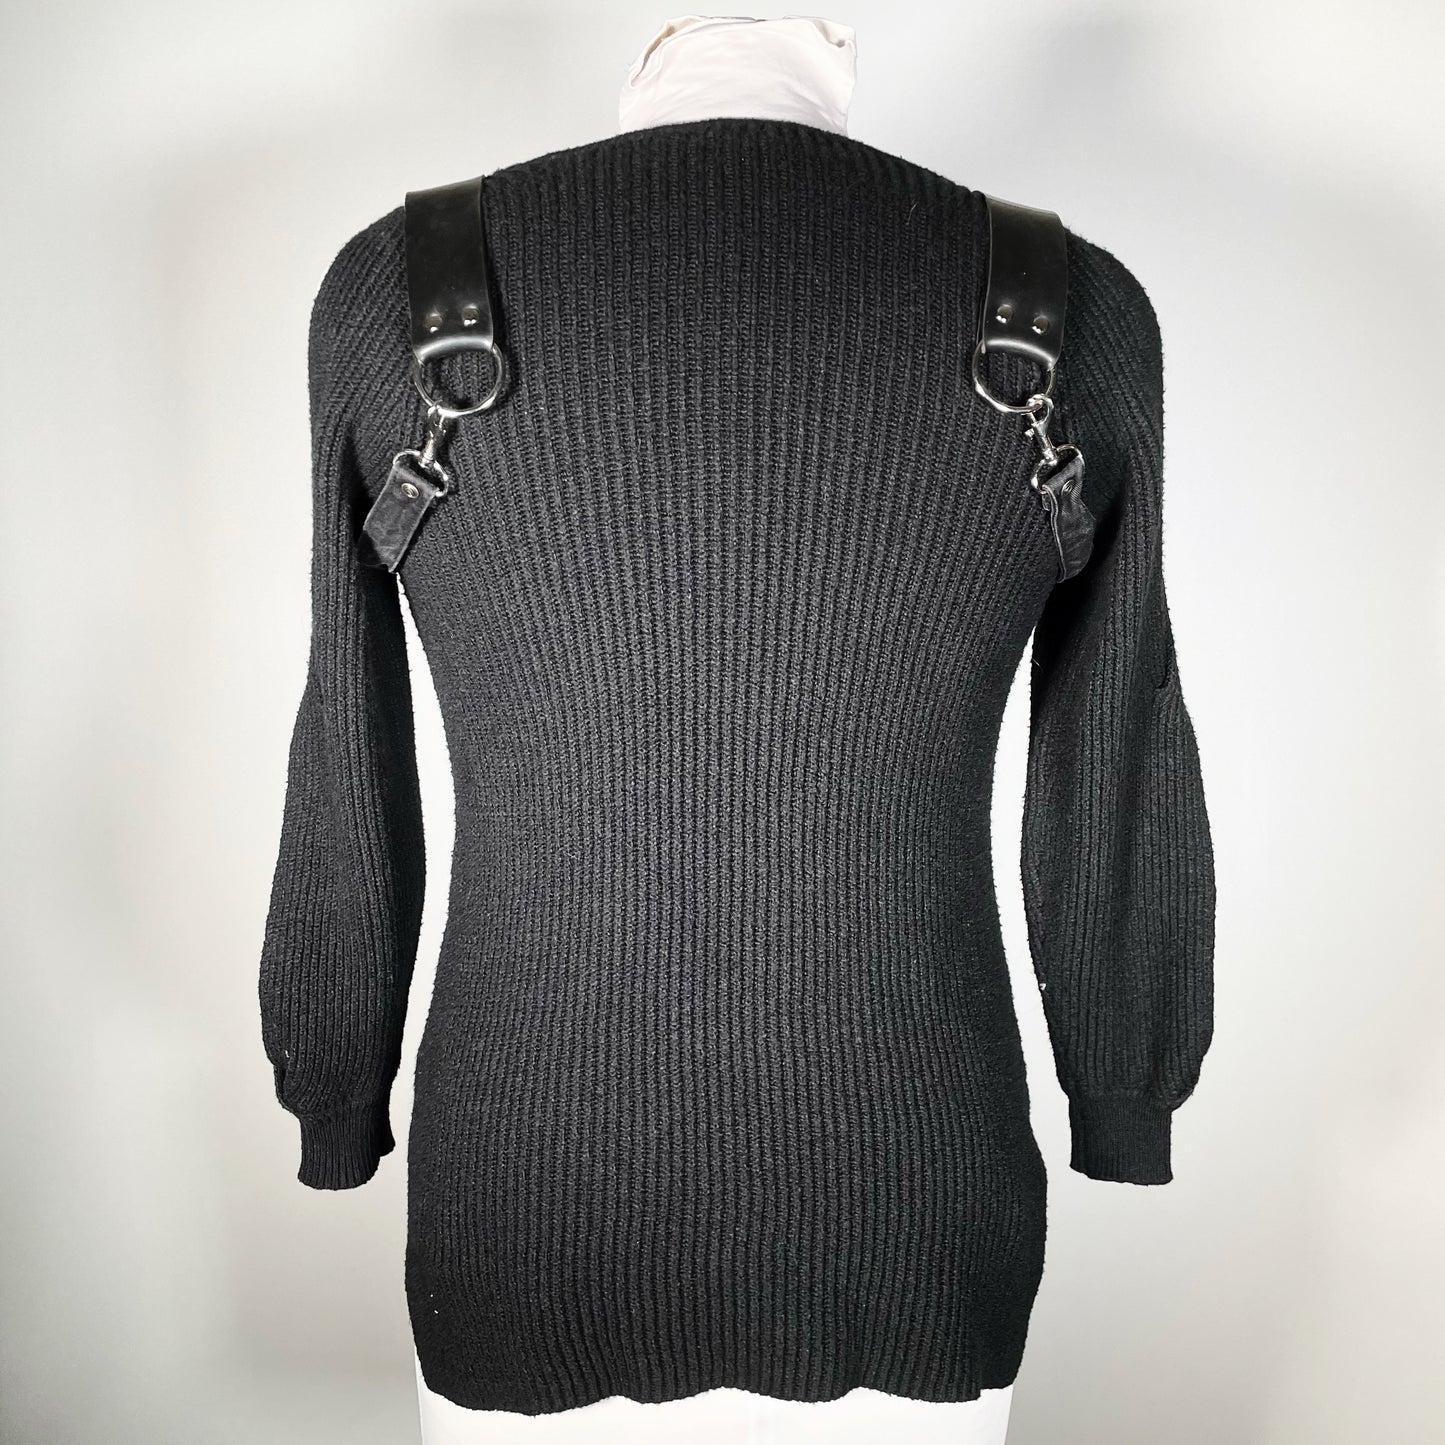 Black Goth Sweater with Bat O-ring, Shoulder Harness Straps and Open Sleeves